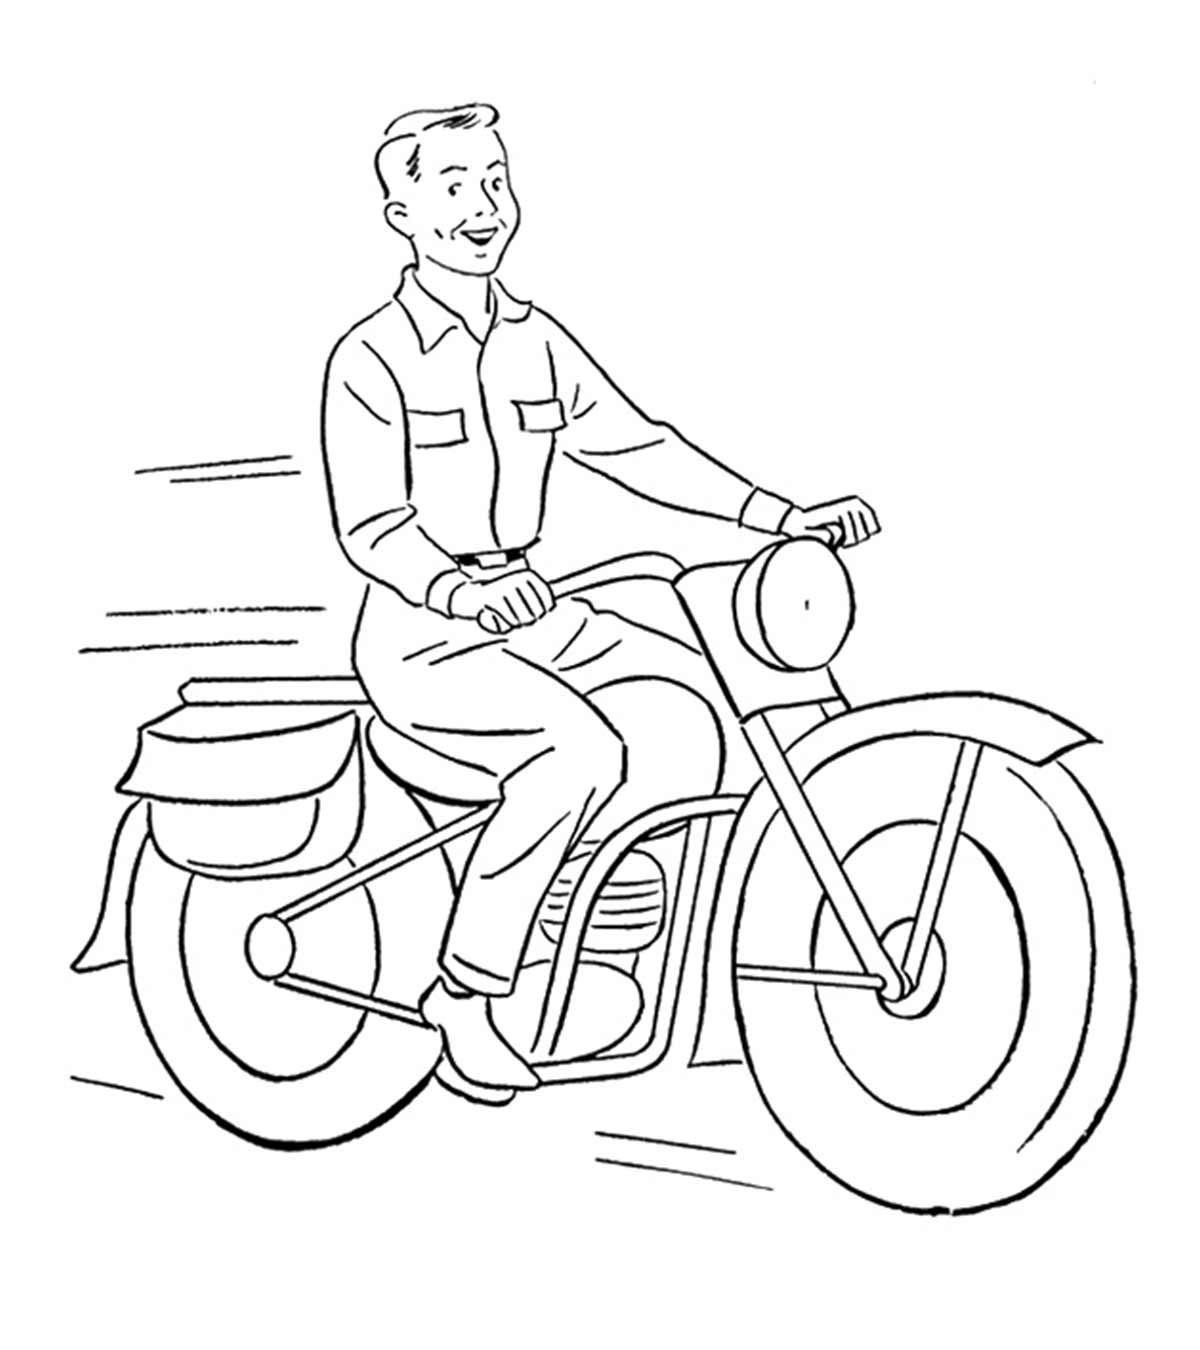 Motorcycle Coloring Pages Free Printable For Kids